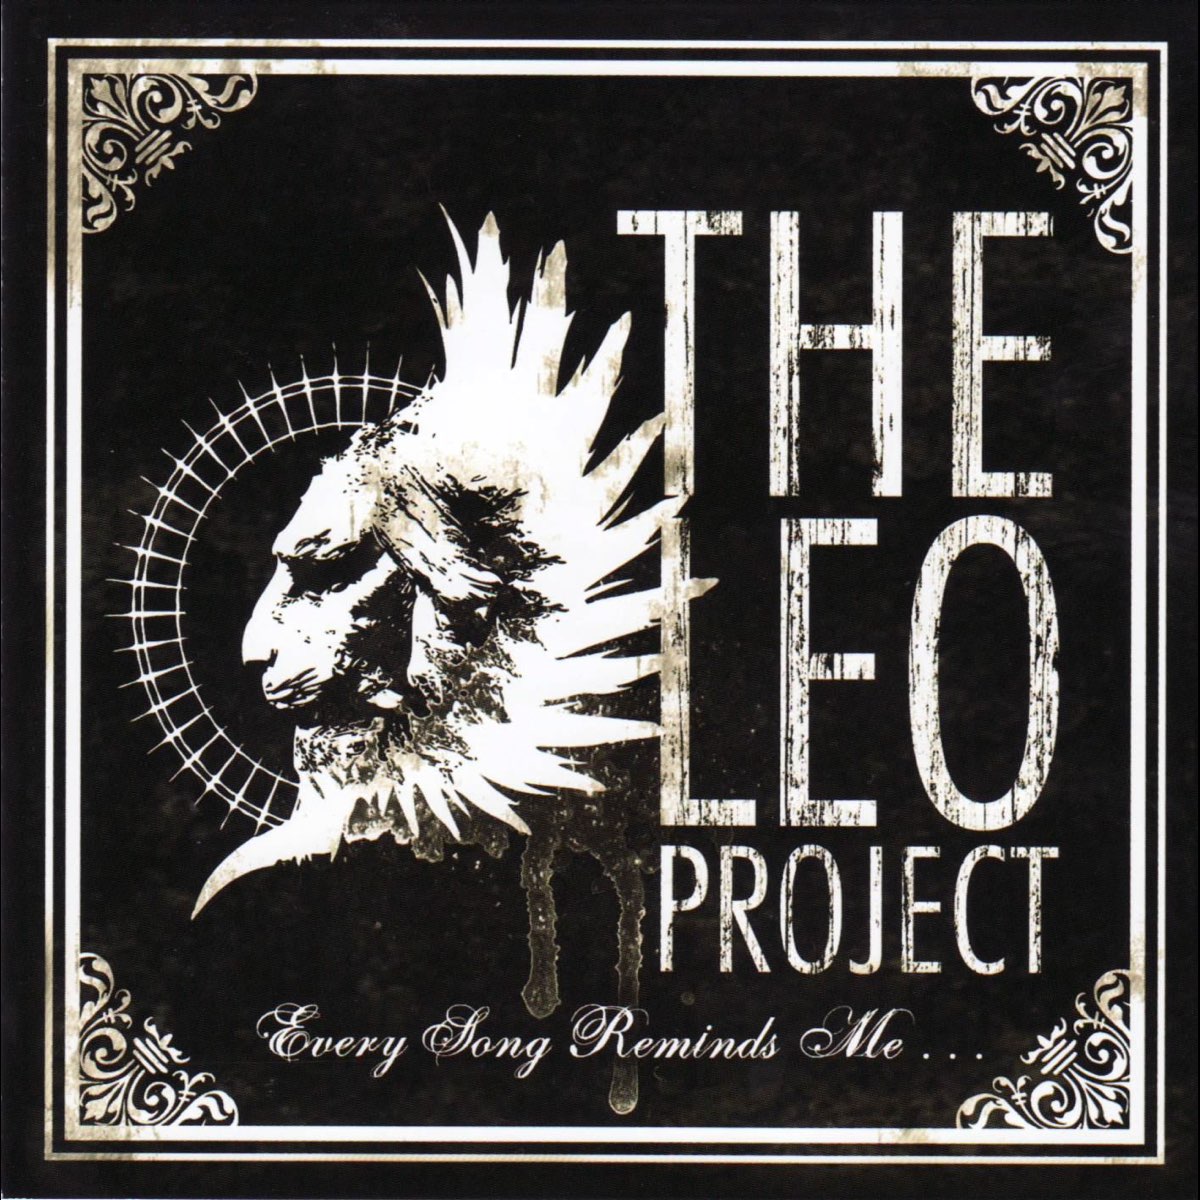 The Leo Project - broken Wings. Cavo - 2006 - the painful Art of letting go. Project every